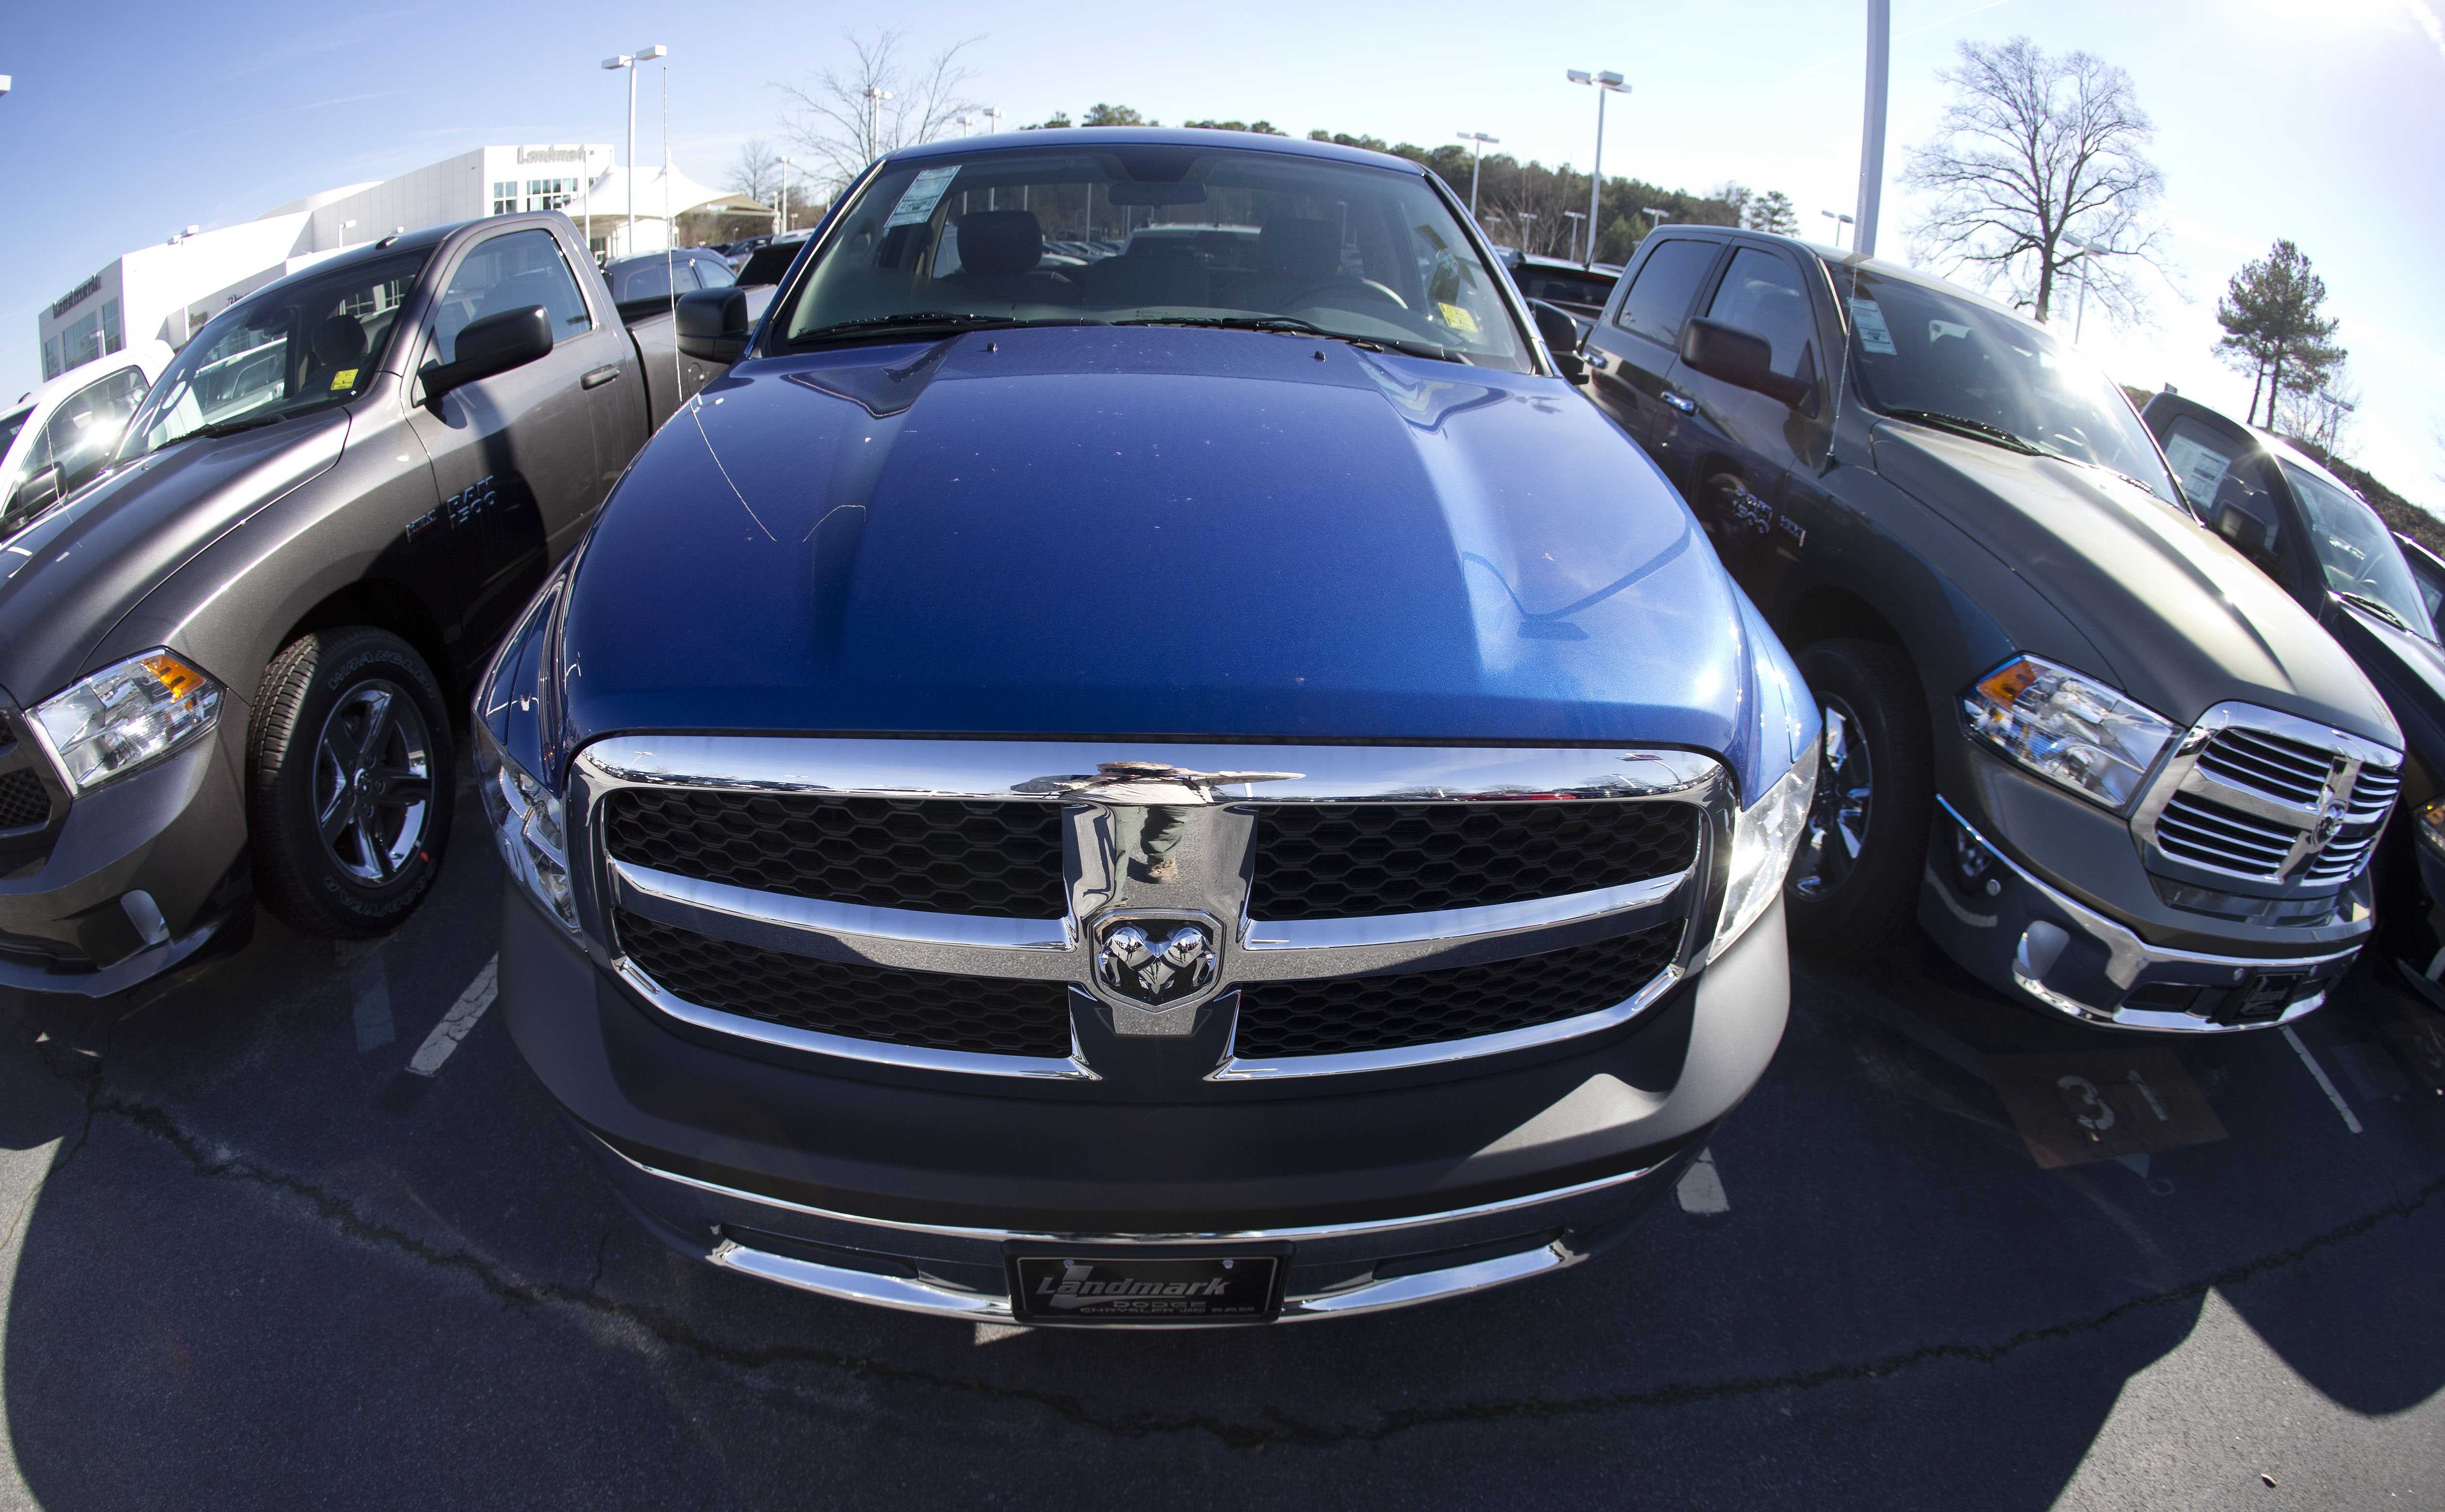 Nearly 500,000 pickup trucks recalled for safety issue